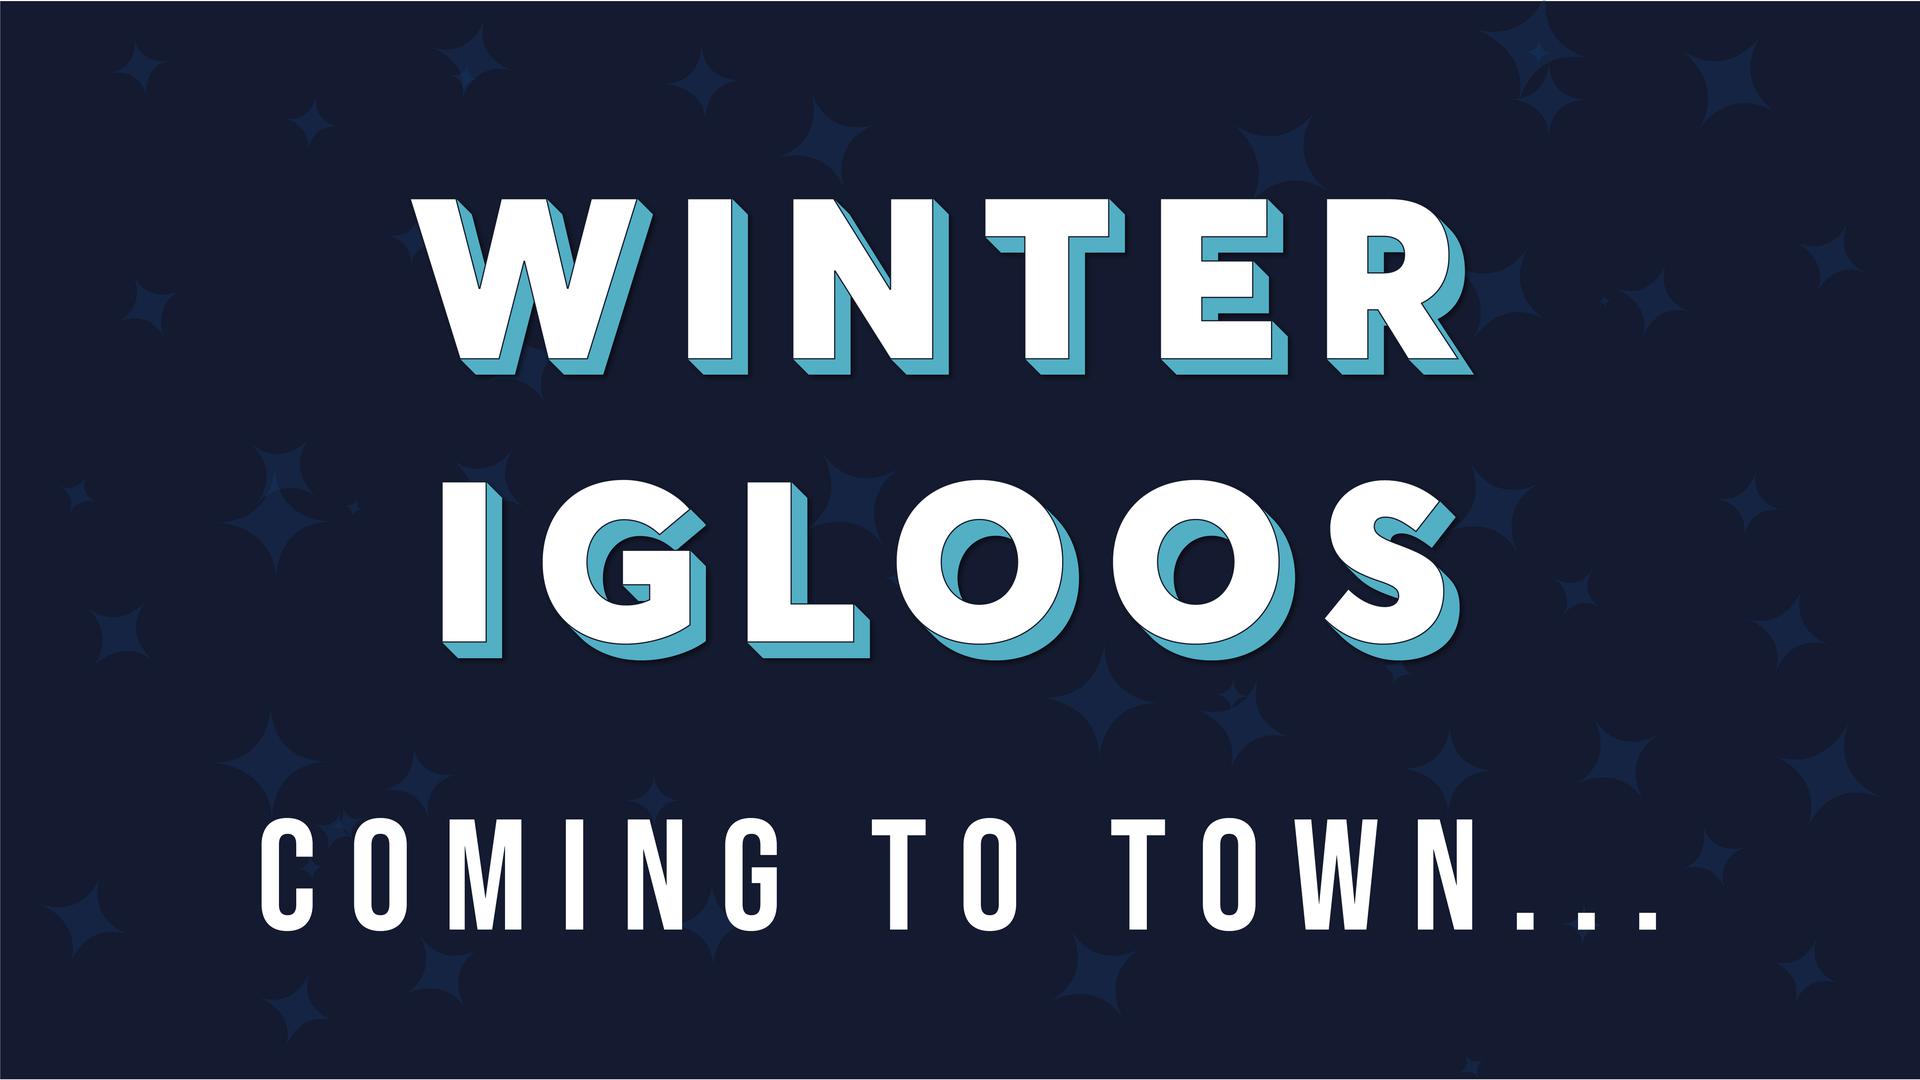 Winter Igloos are coming to town